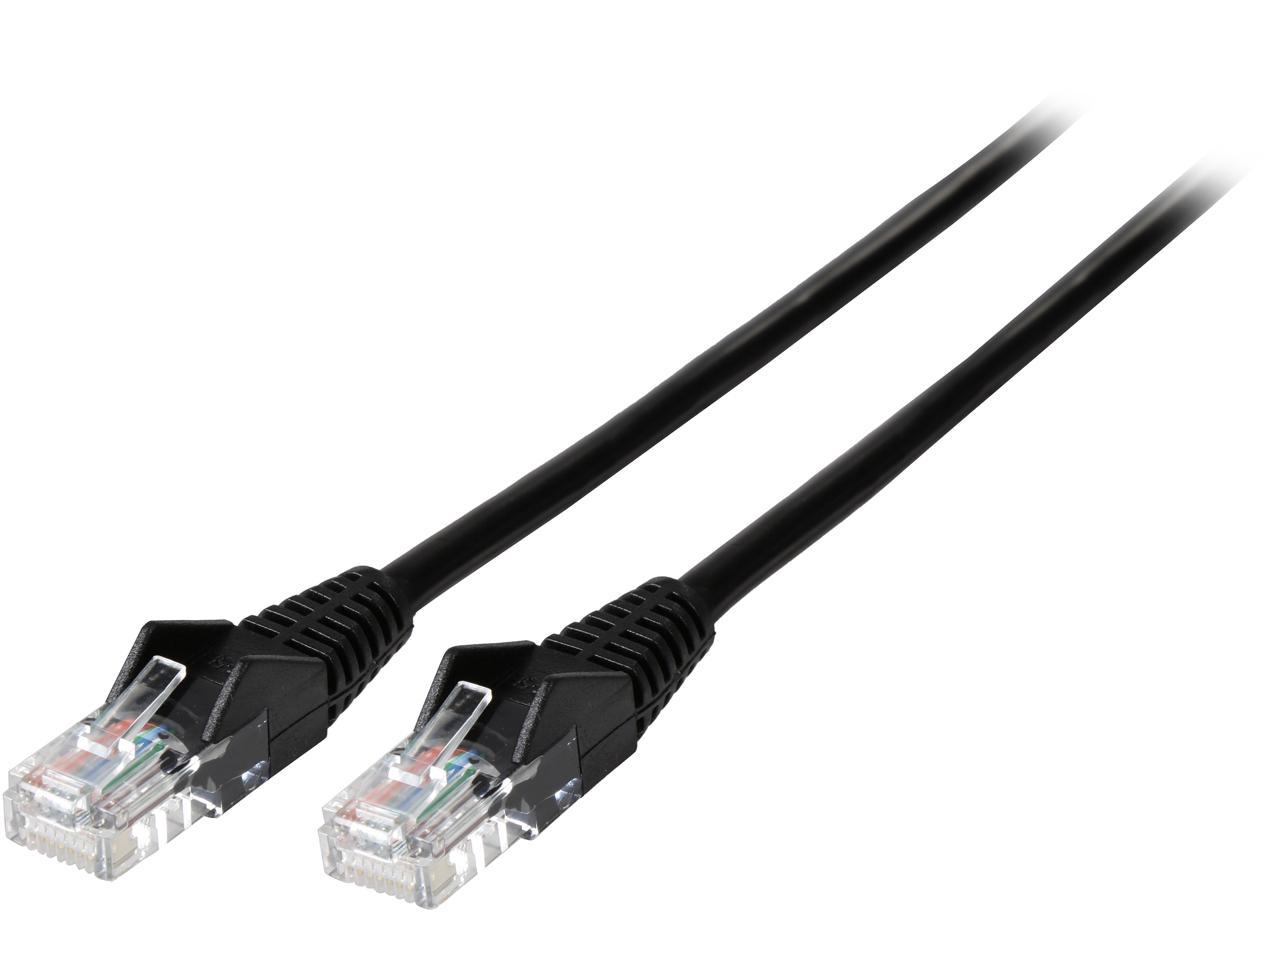 TRIPP LITE N001-006-BK 6 ft. Cat 5/5E Black 350MHz Snagless Molded Patch Cable